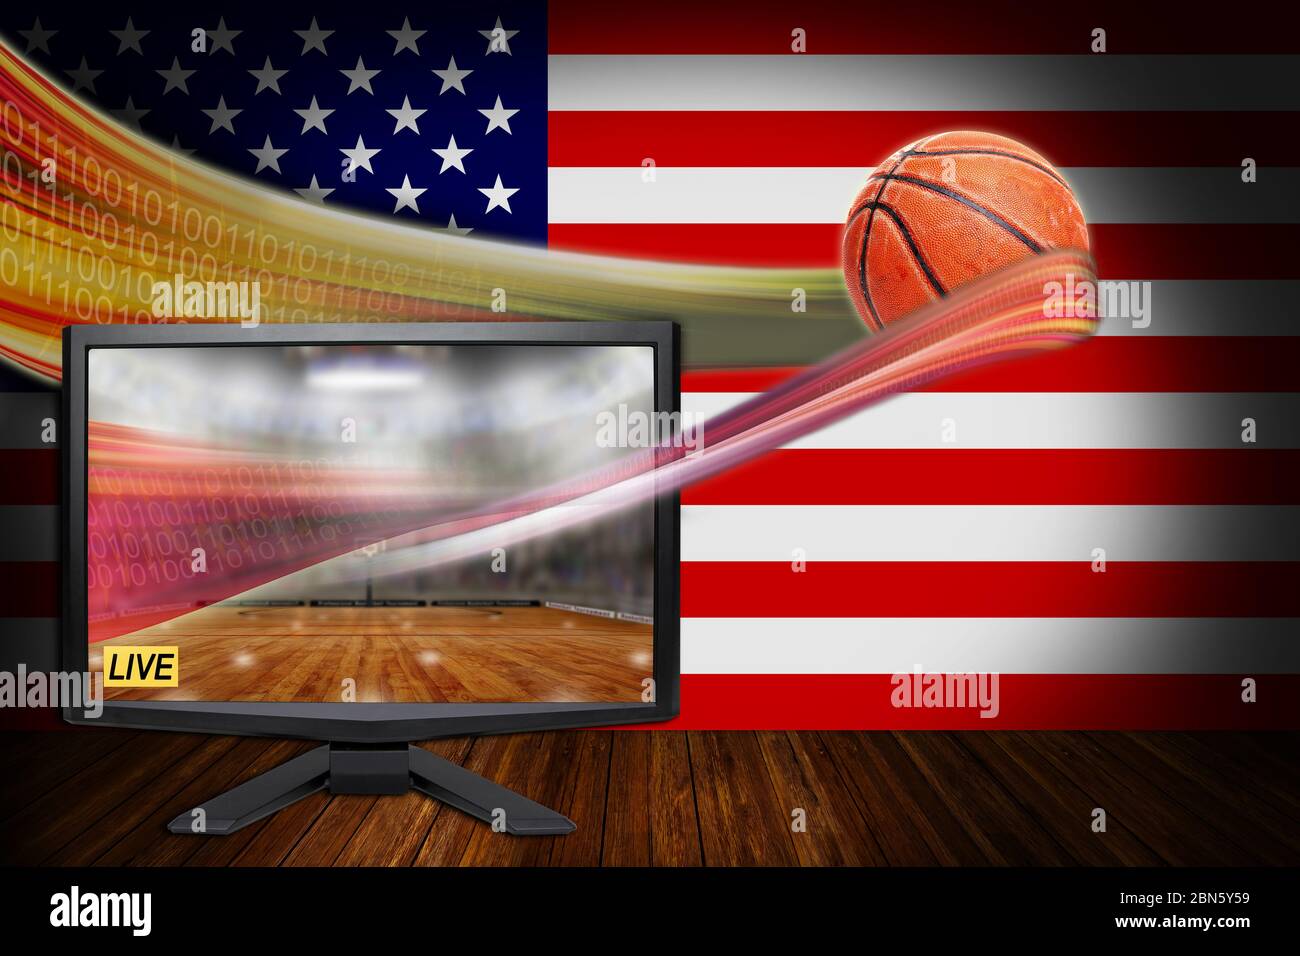 Live Sports High Resolution Stock Photography and Images - Alamy